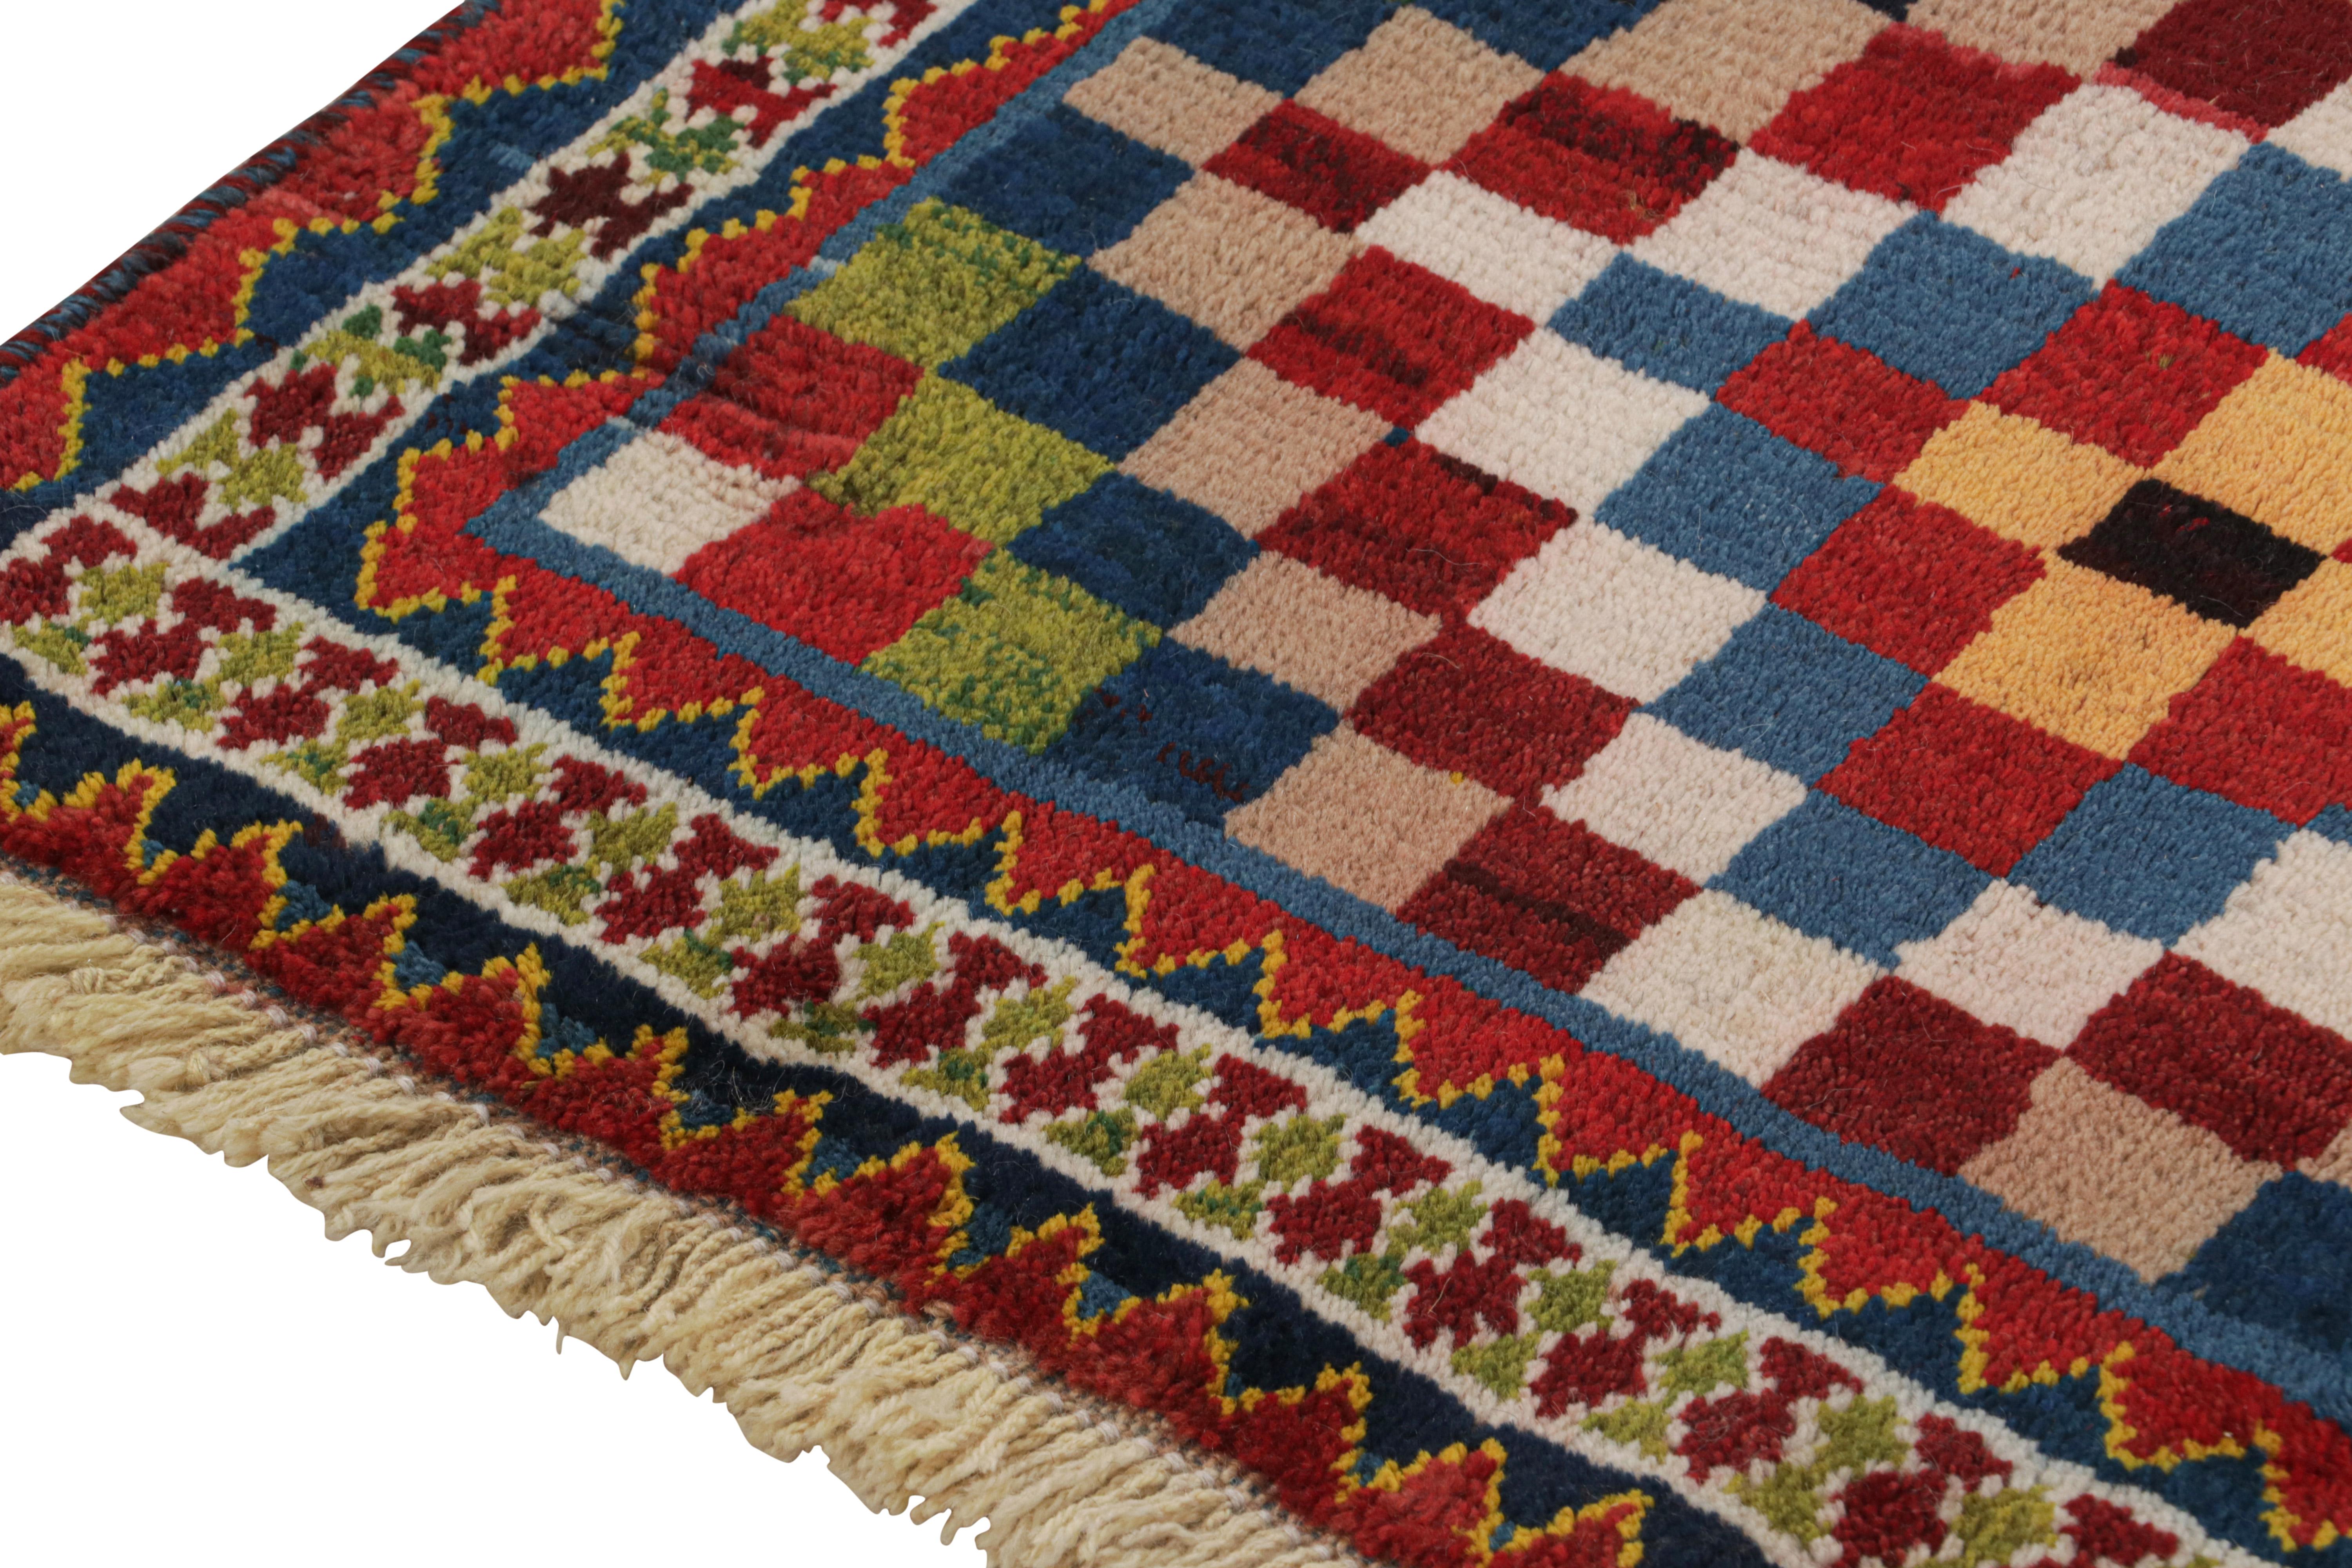 Vintage Qashqai Persian Gabbeh Runner with Geometric Patterns by Rug & Kilim In Good Condition For Sale In Long Island City, NY